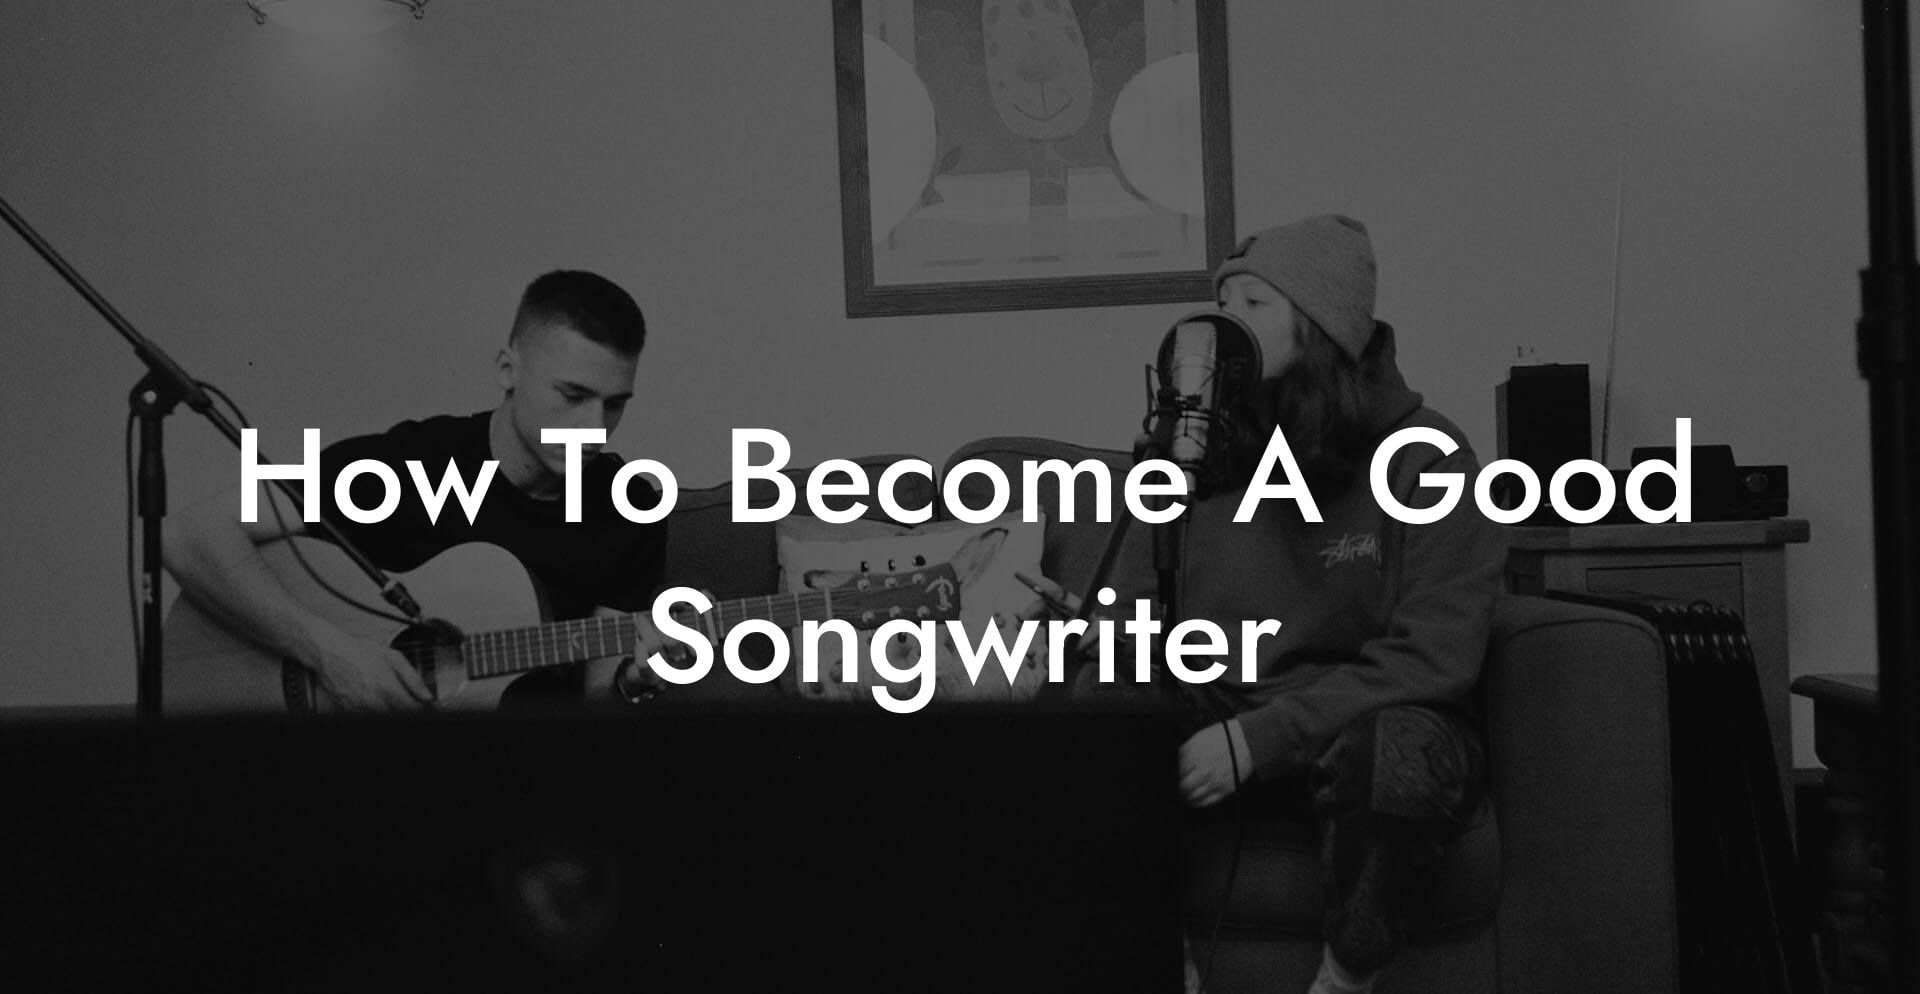 how to become a good songwriter lyric assistant